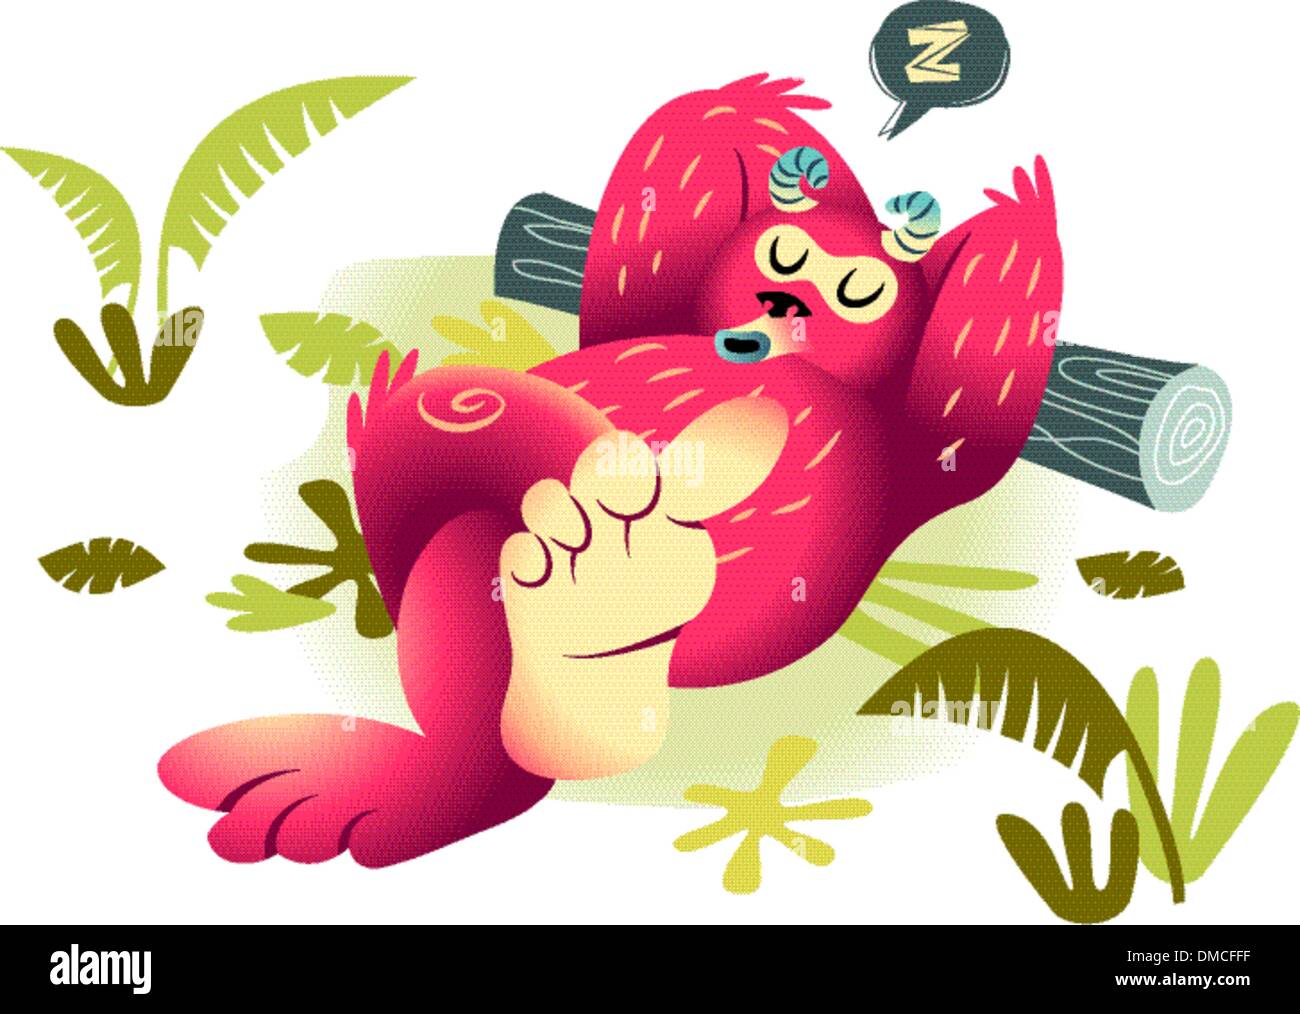 A vector illustration of a fuzzy monster taking a nap Stock Vector